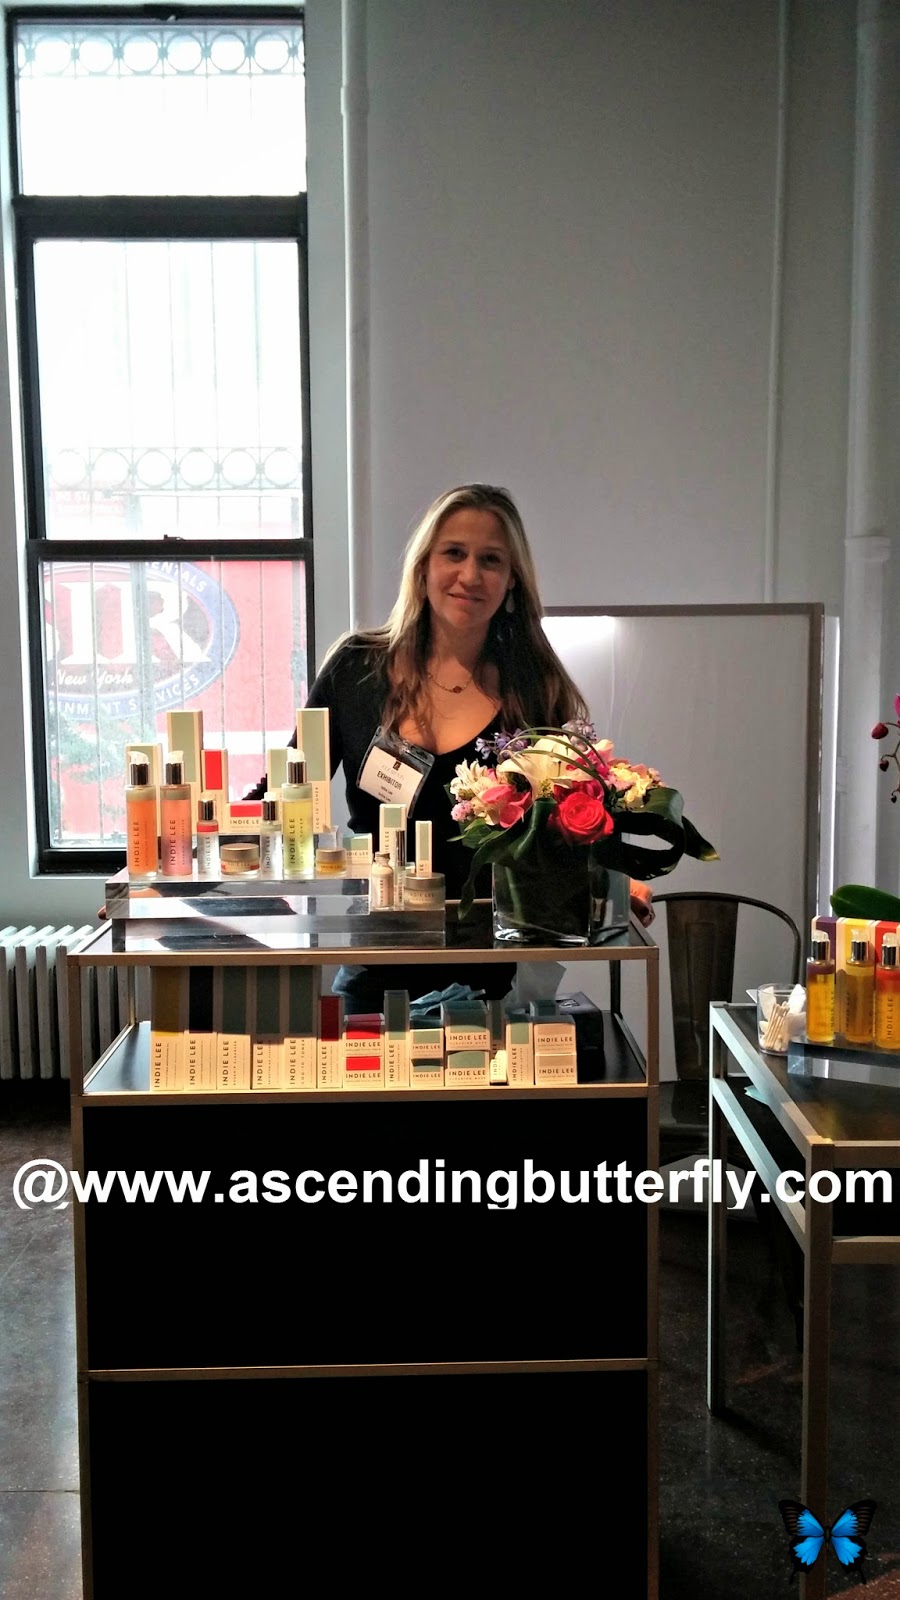 Eco Beauty Brand Indie Lee Products Display at Elements Showcase New York City February 2014